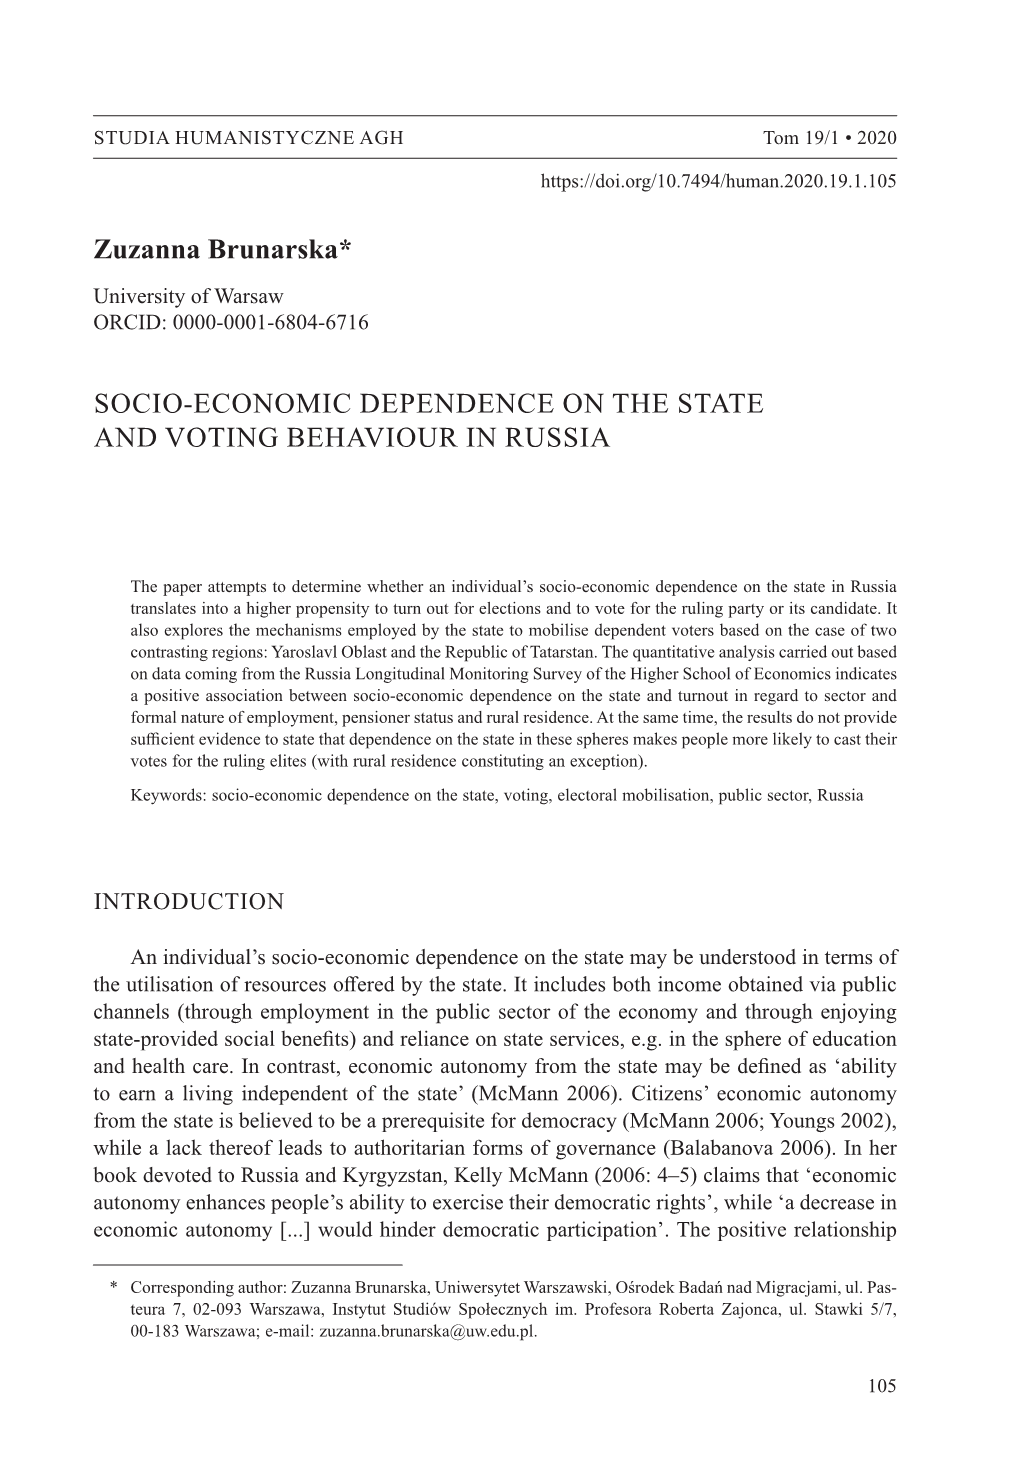 Socio-Economic Dependence on the State and Voting Behaviour in Russia